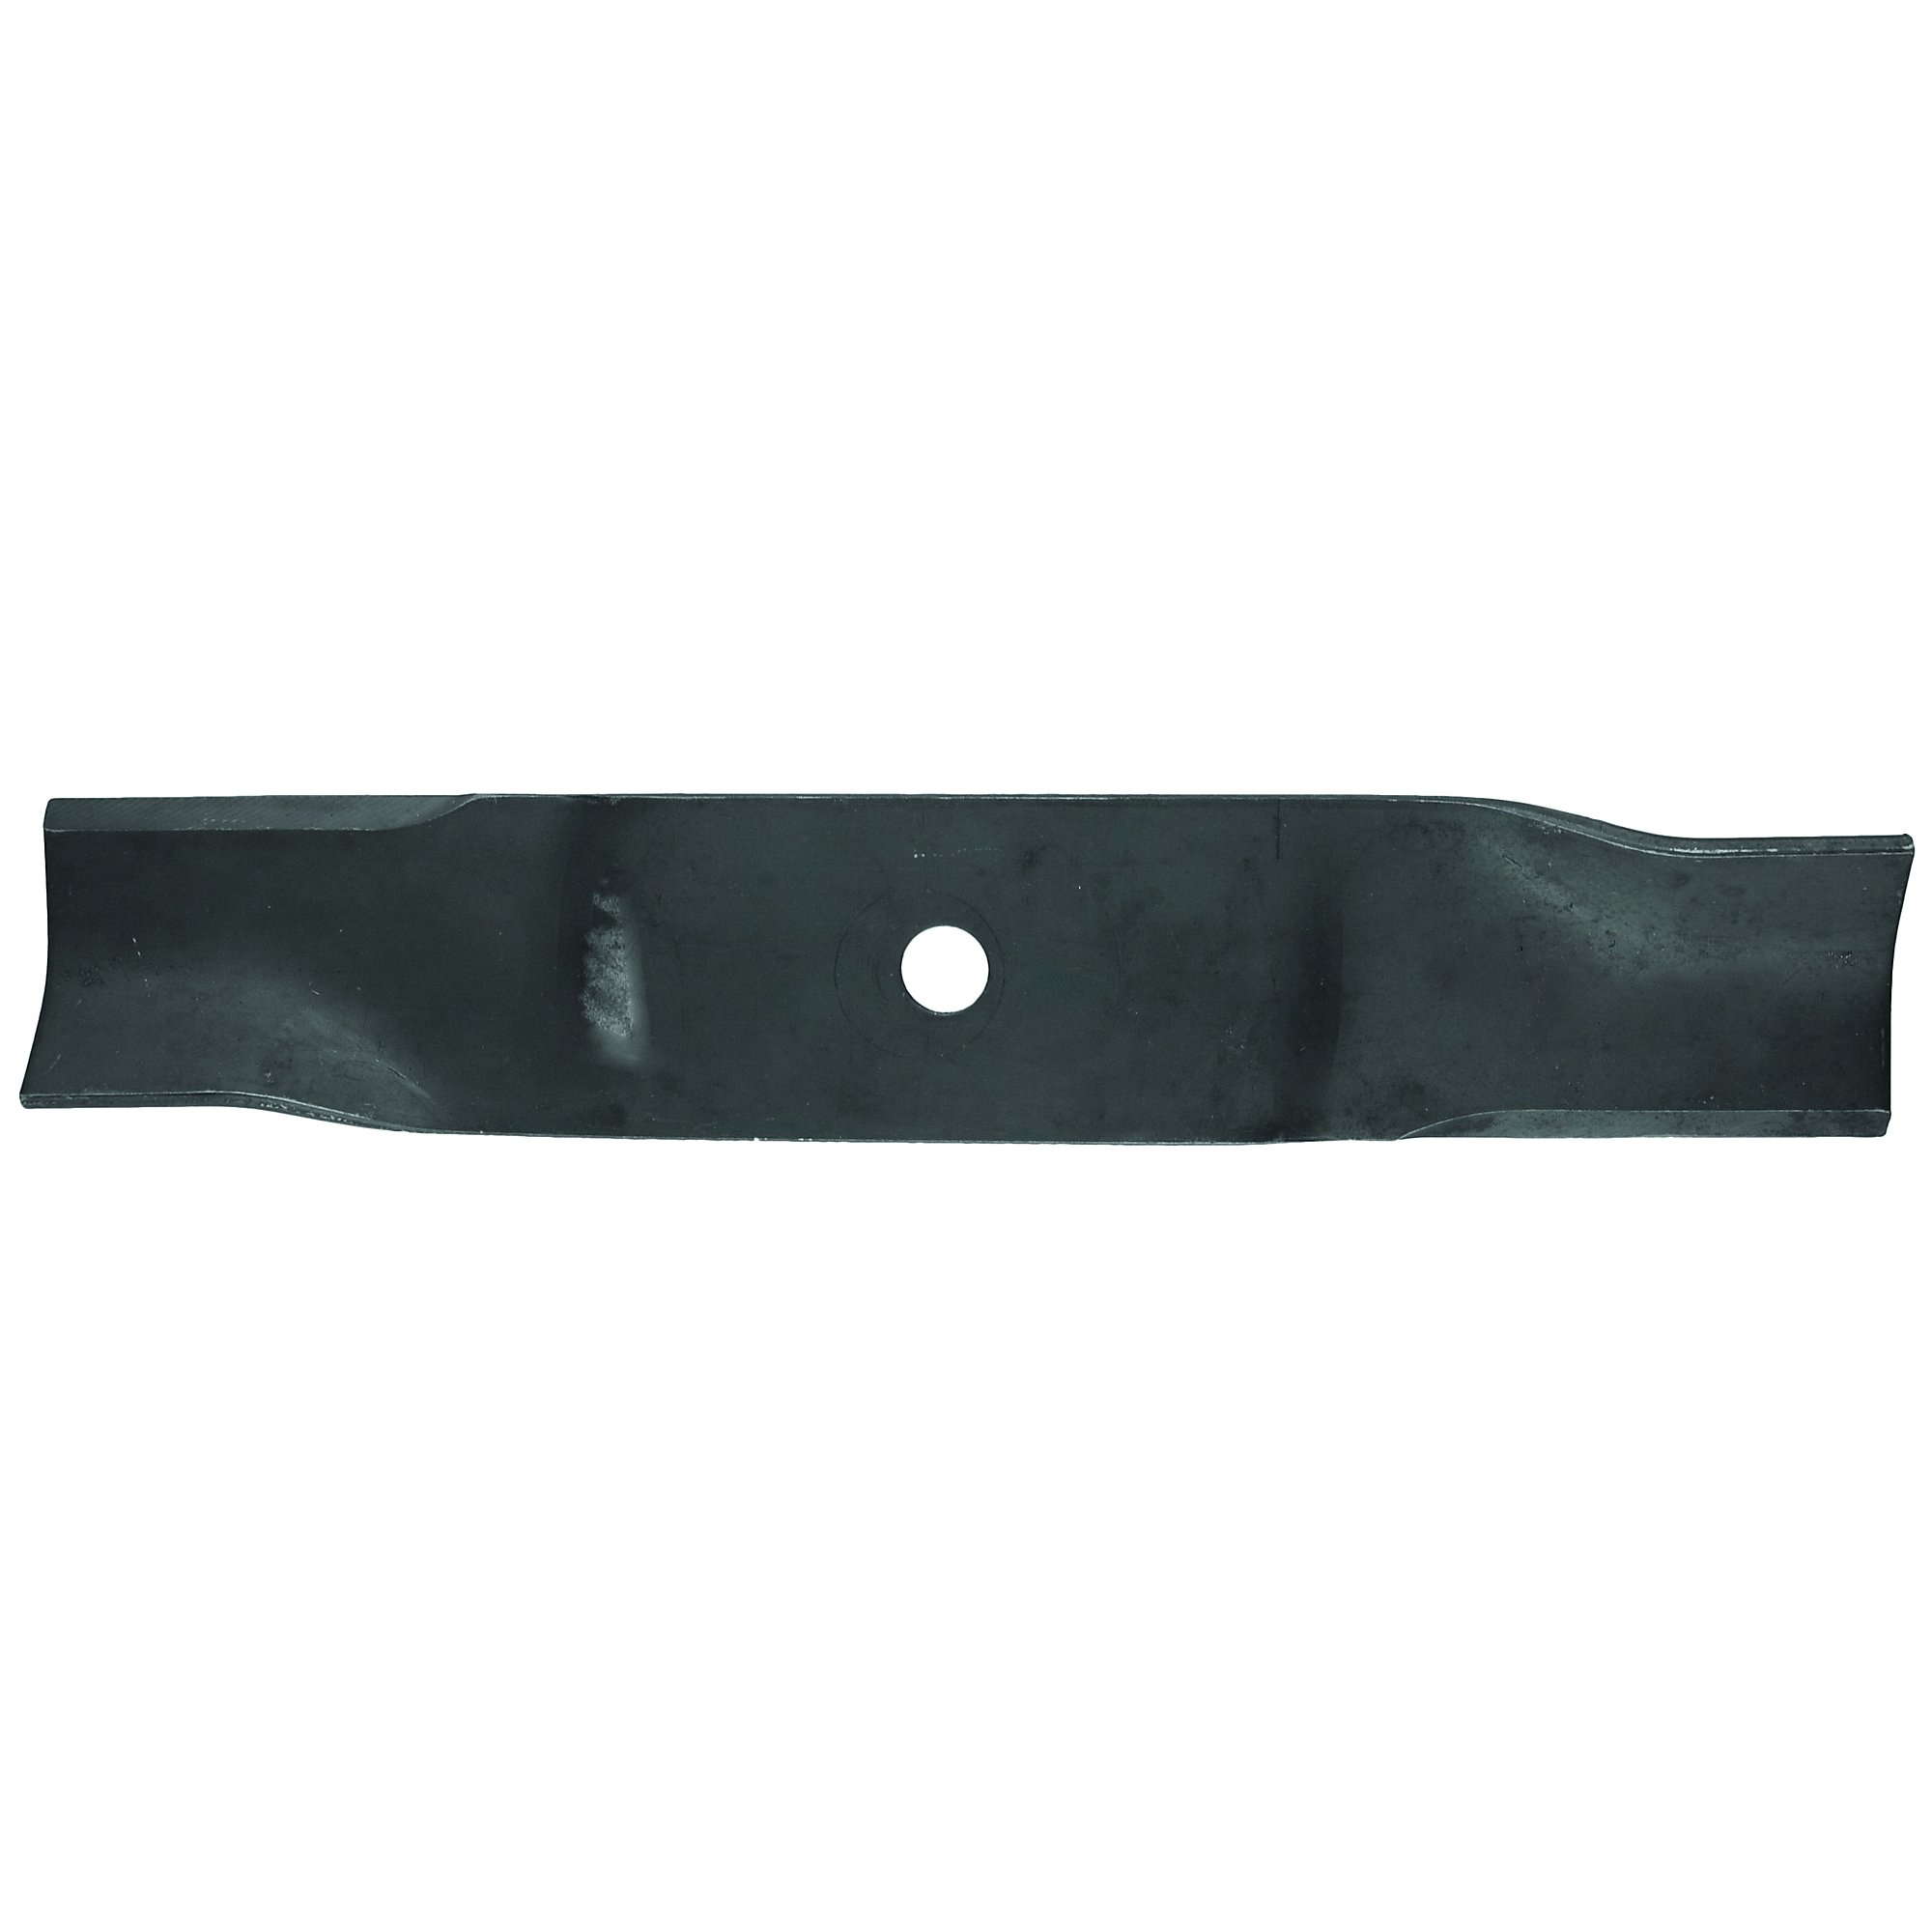 Oregon, Replacement Lawn Mower Blade, Length 16.5 in, Model 98-081